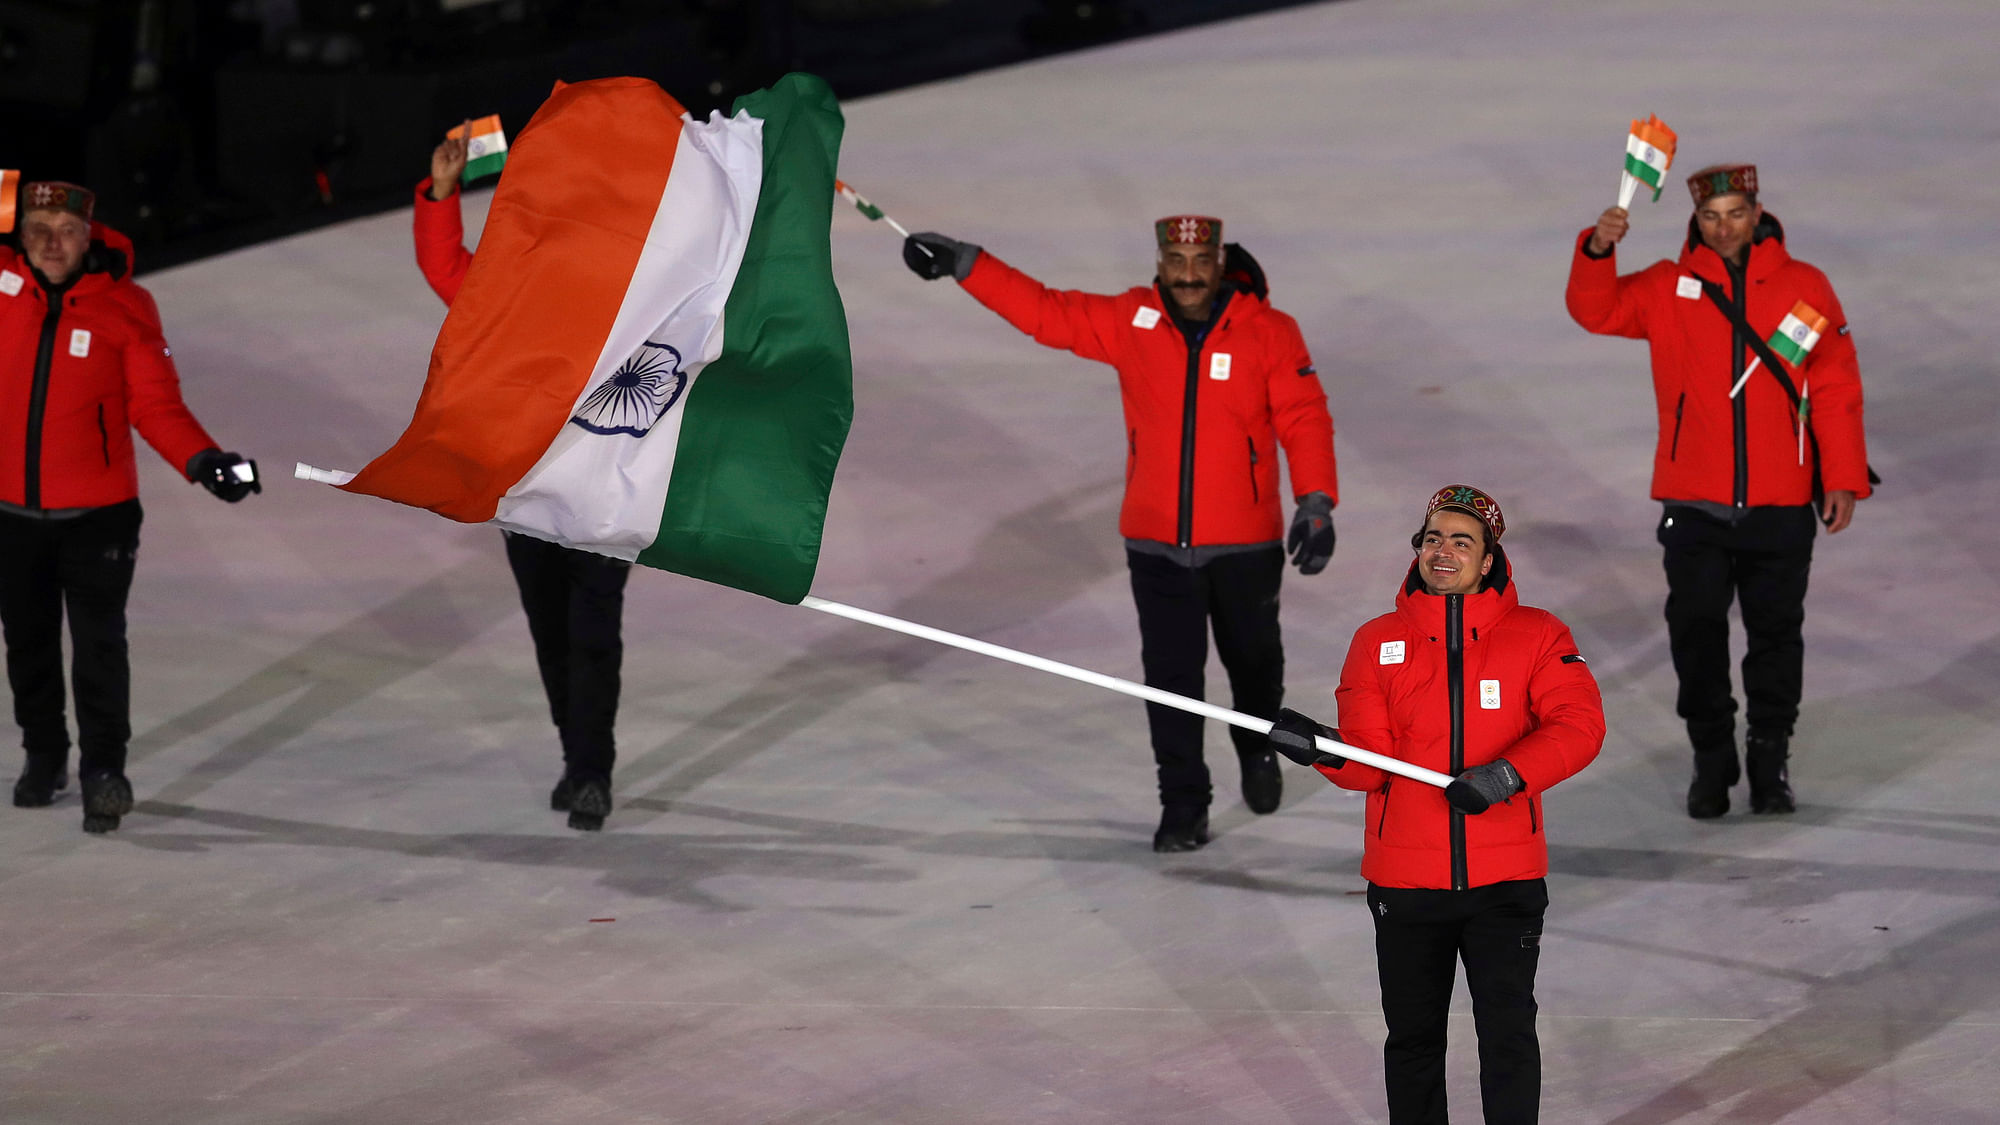 Shiva Keshavan carries the flag of India during the opening ceremony of the 2018 Winter Olympics in Pyeongchang in South Korea.